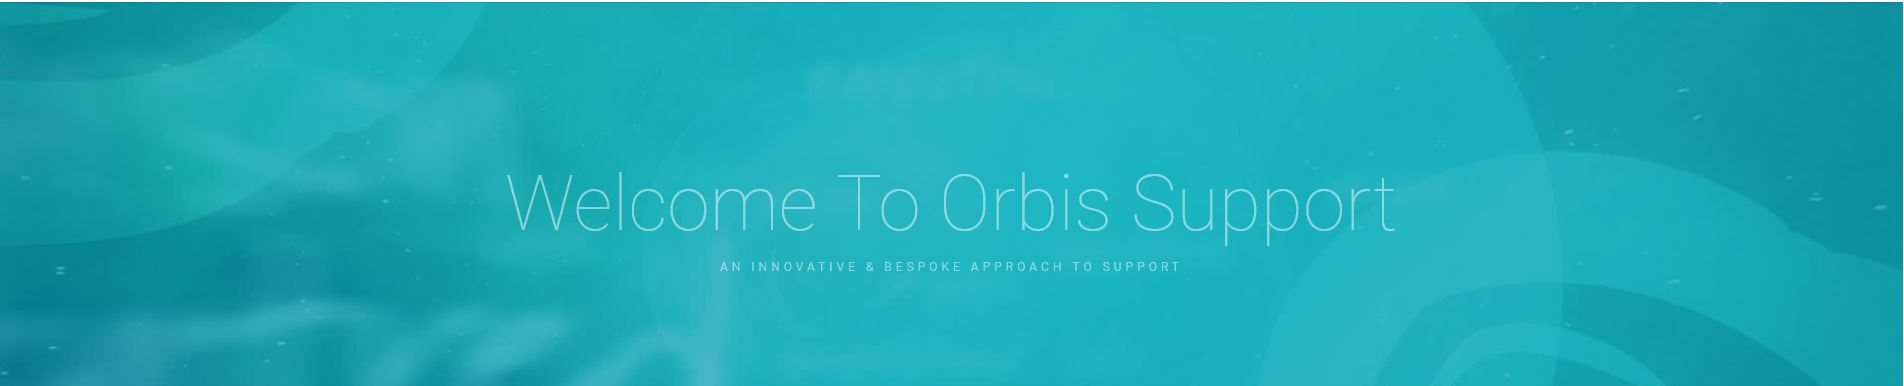 Welcome to Orbis Support, an Innovative & bespoke approach to support.